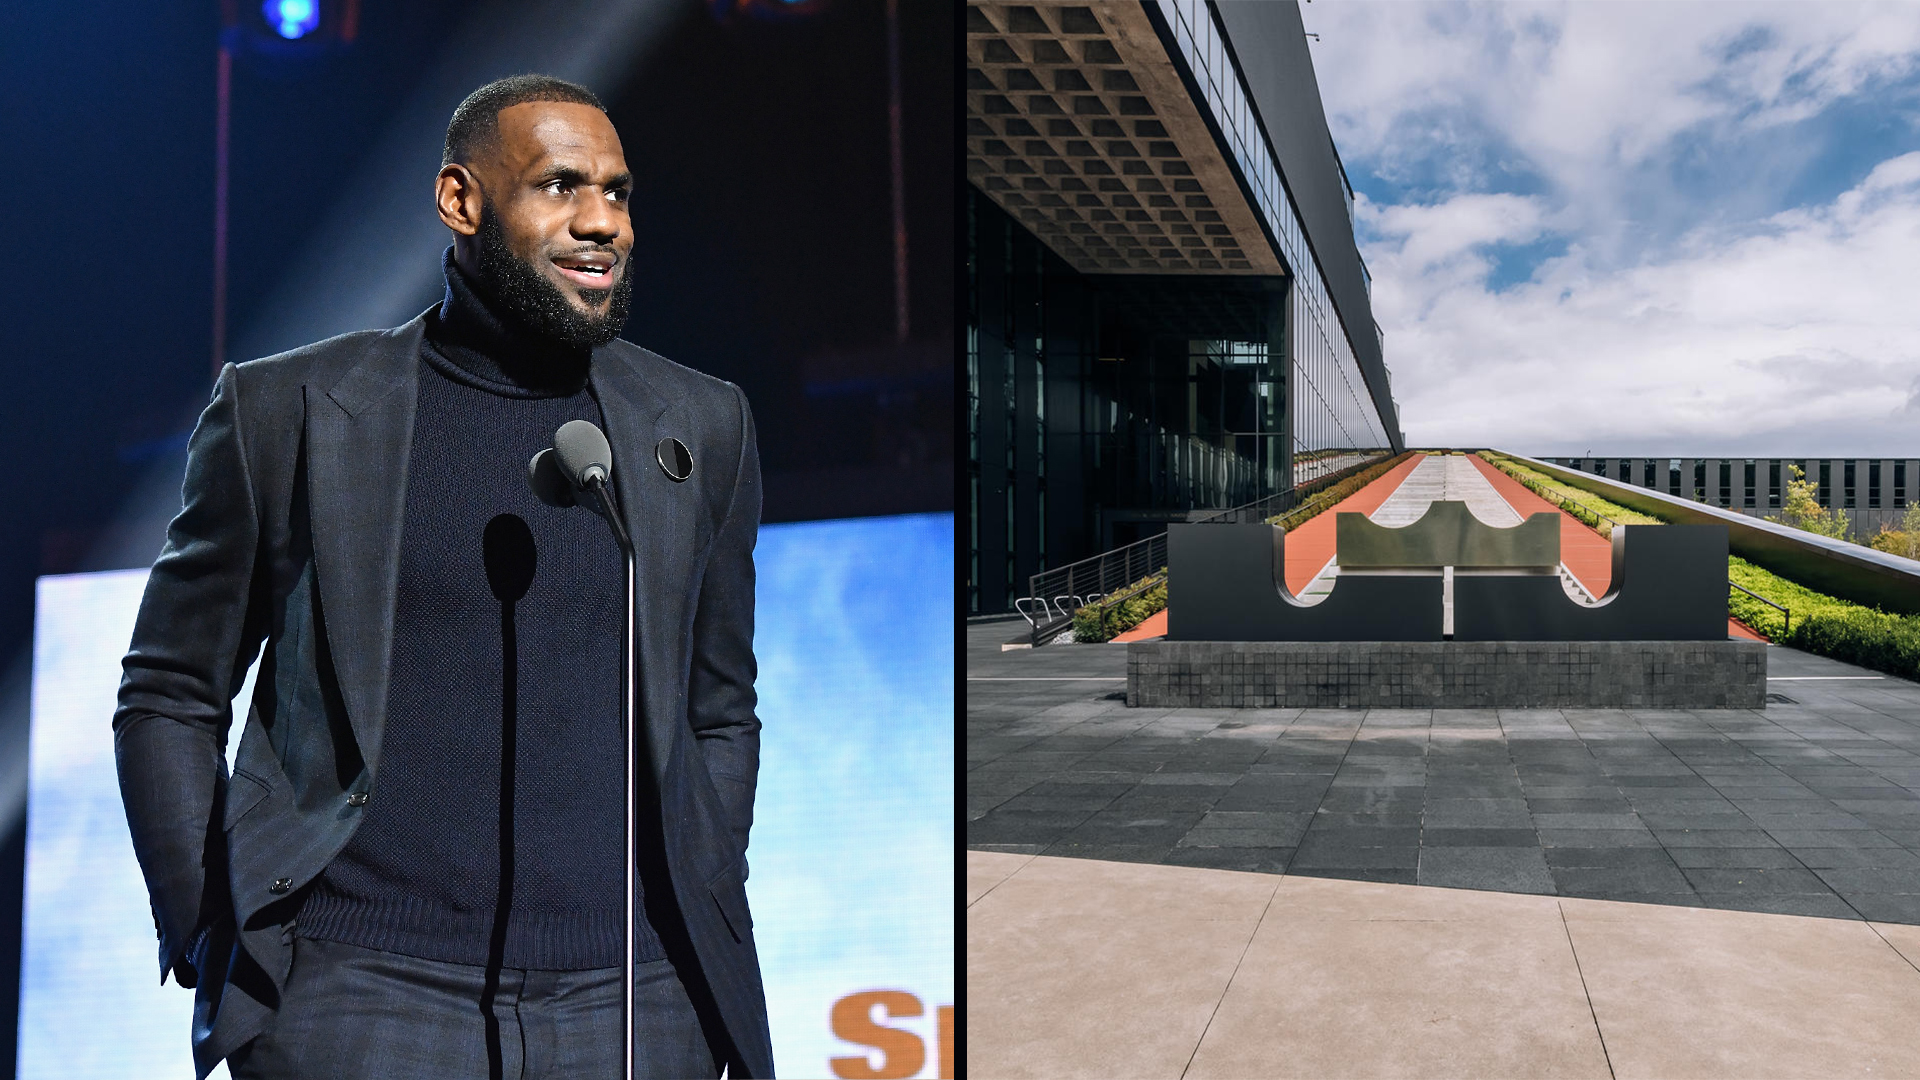 Exclusive: Nike Unveils The LeBron James Innovation Center As It Intersects Sports, Tech & Science